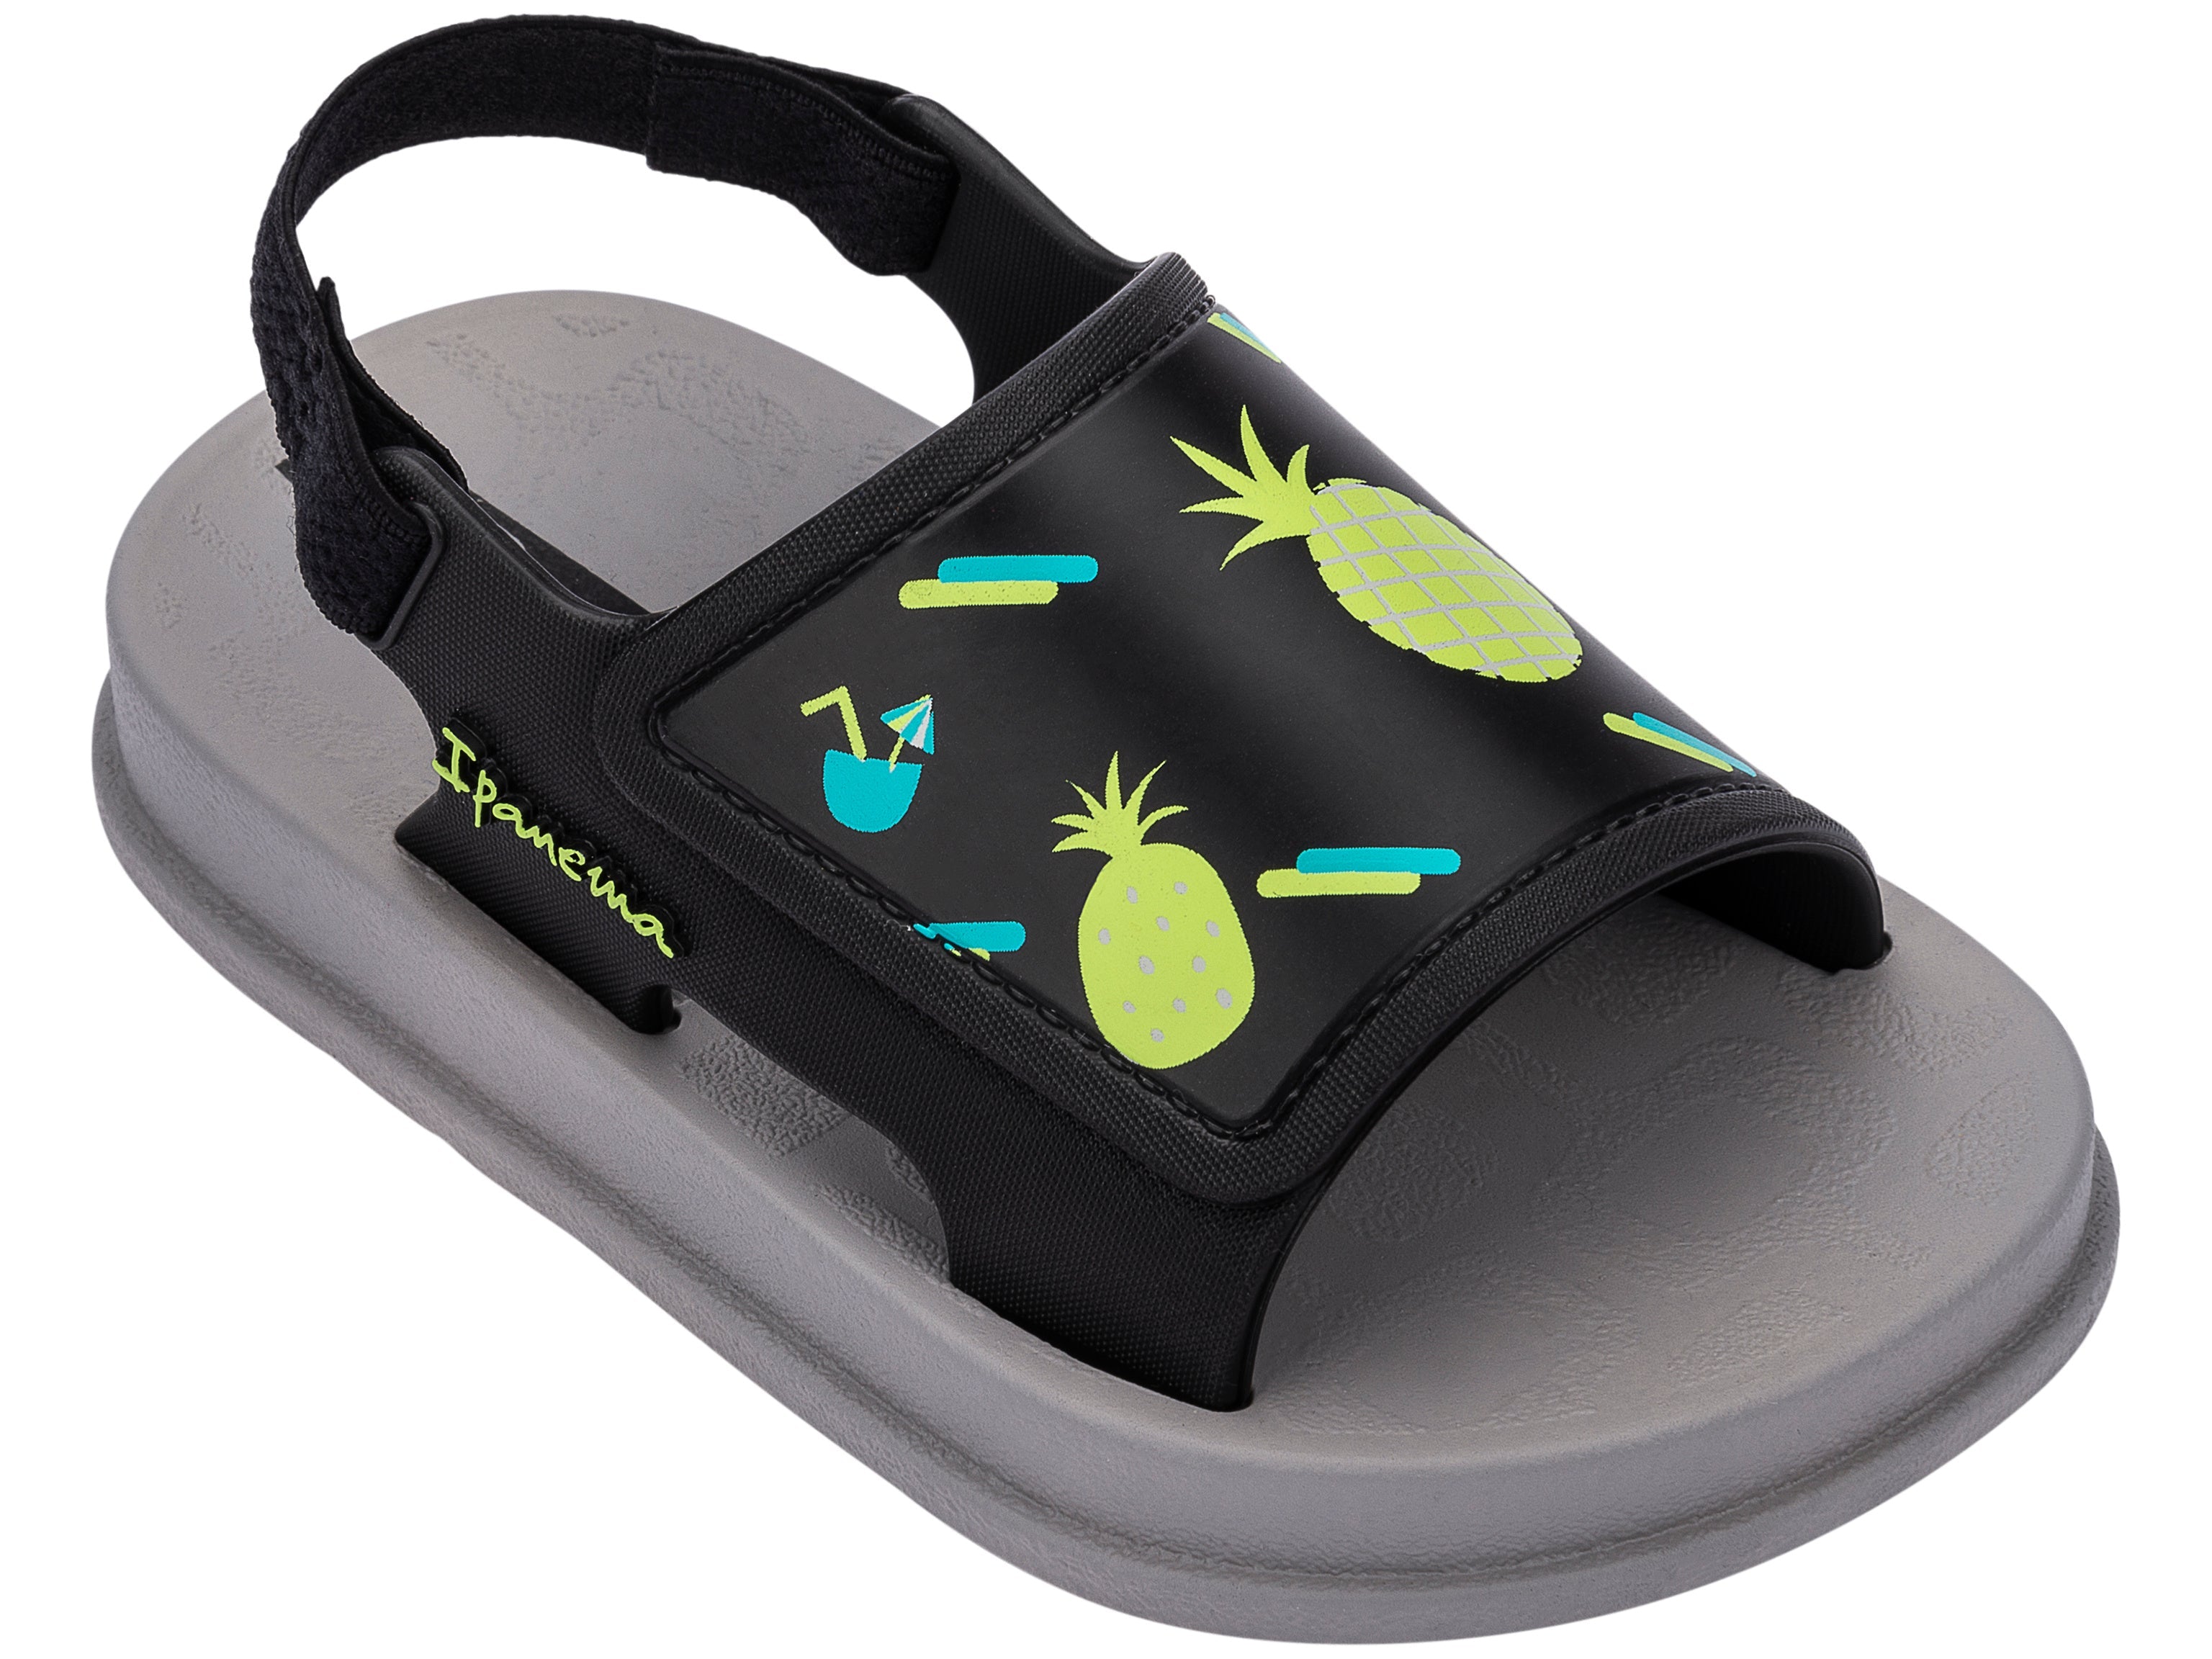 Angled view of a grey Ipanema Soft baby sandal with fruit print on the black upper.